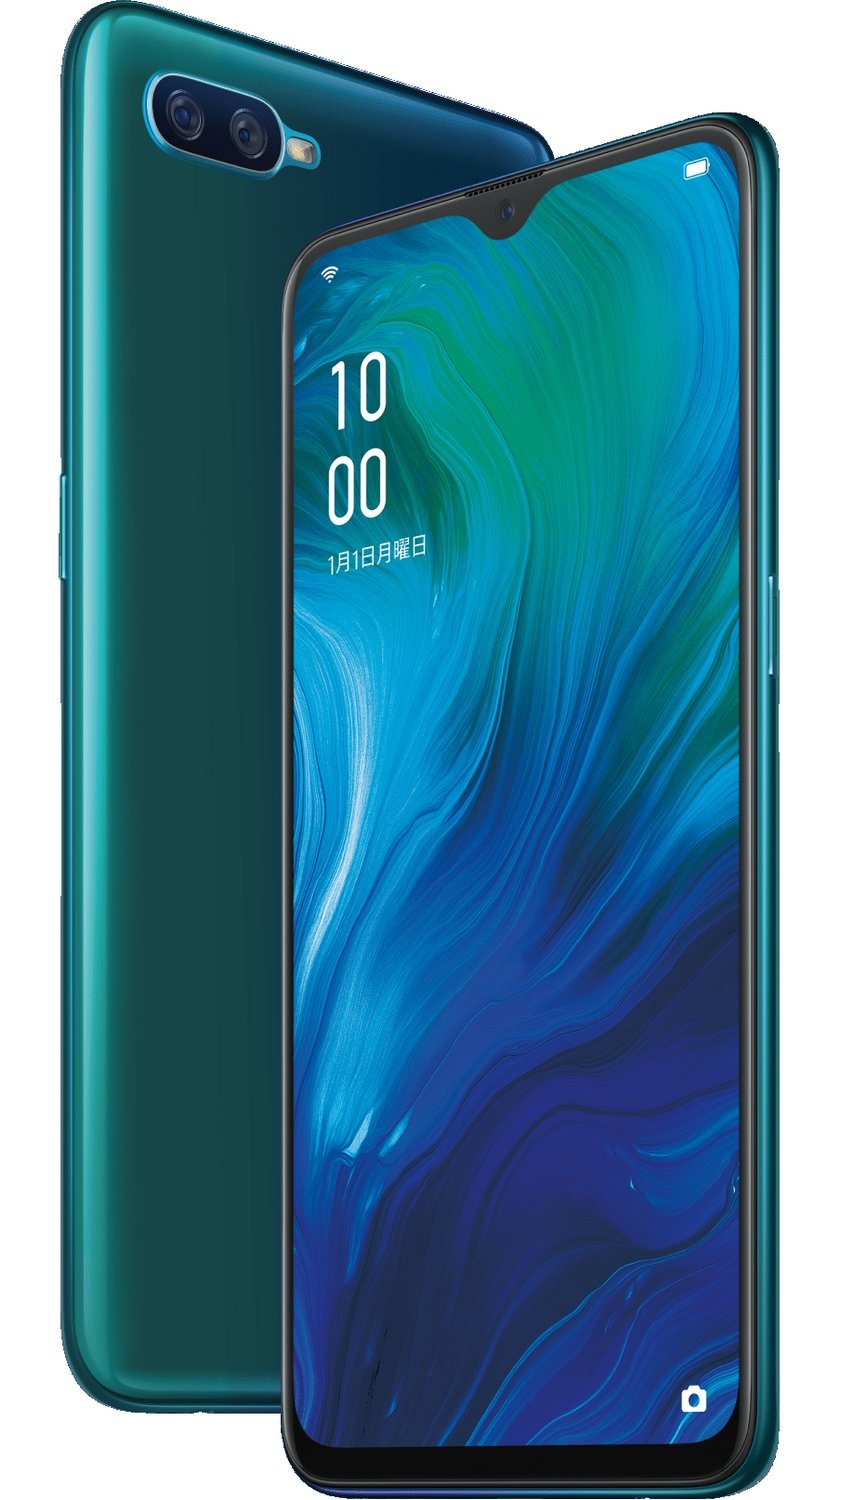 Oppo Reno A specs, review, release date - PhonesData